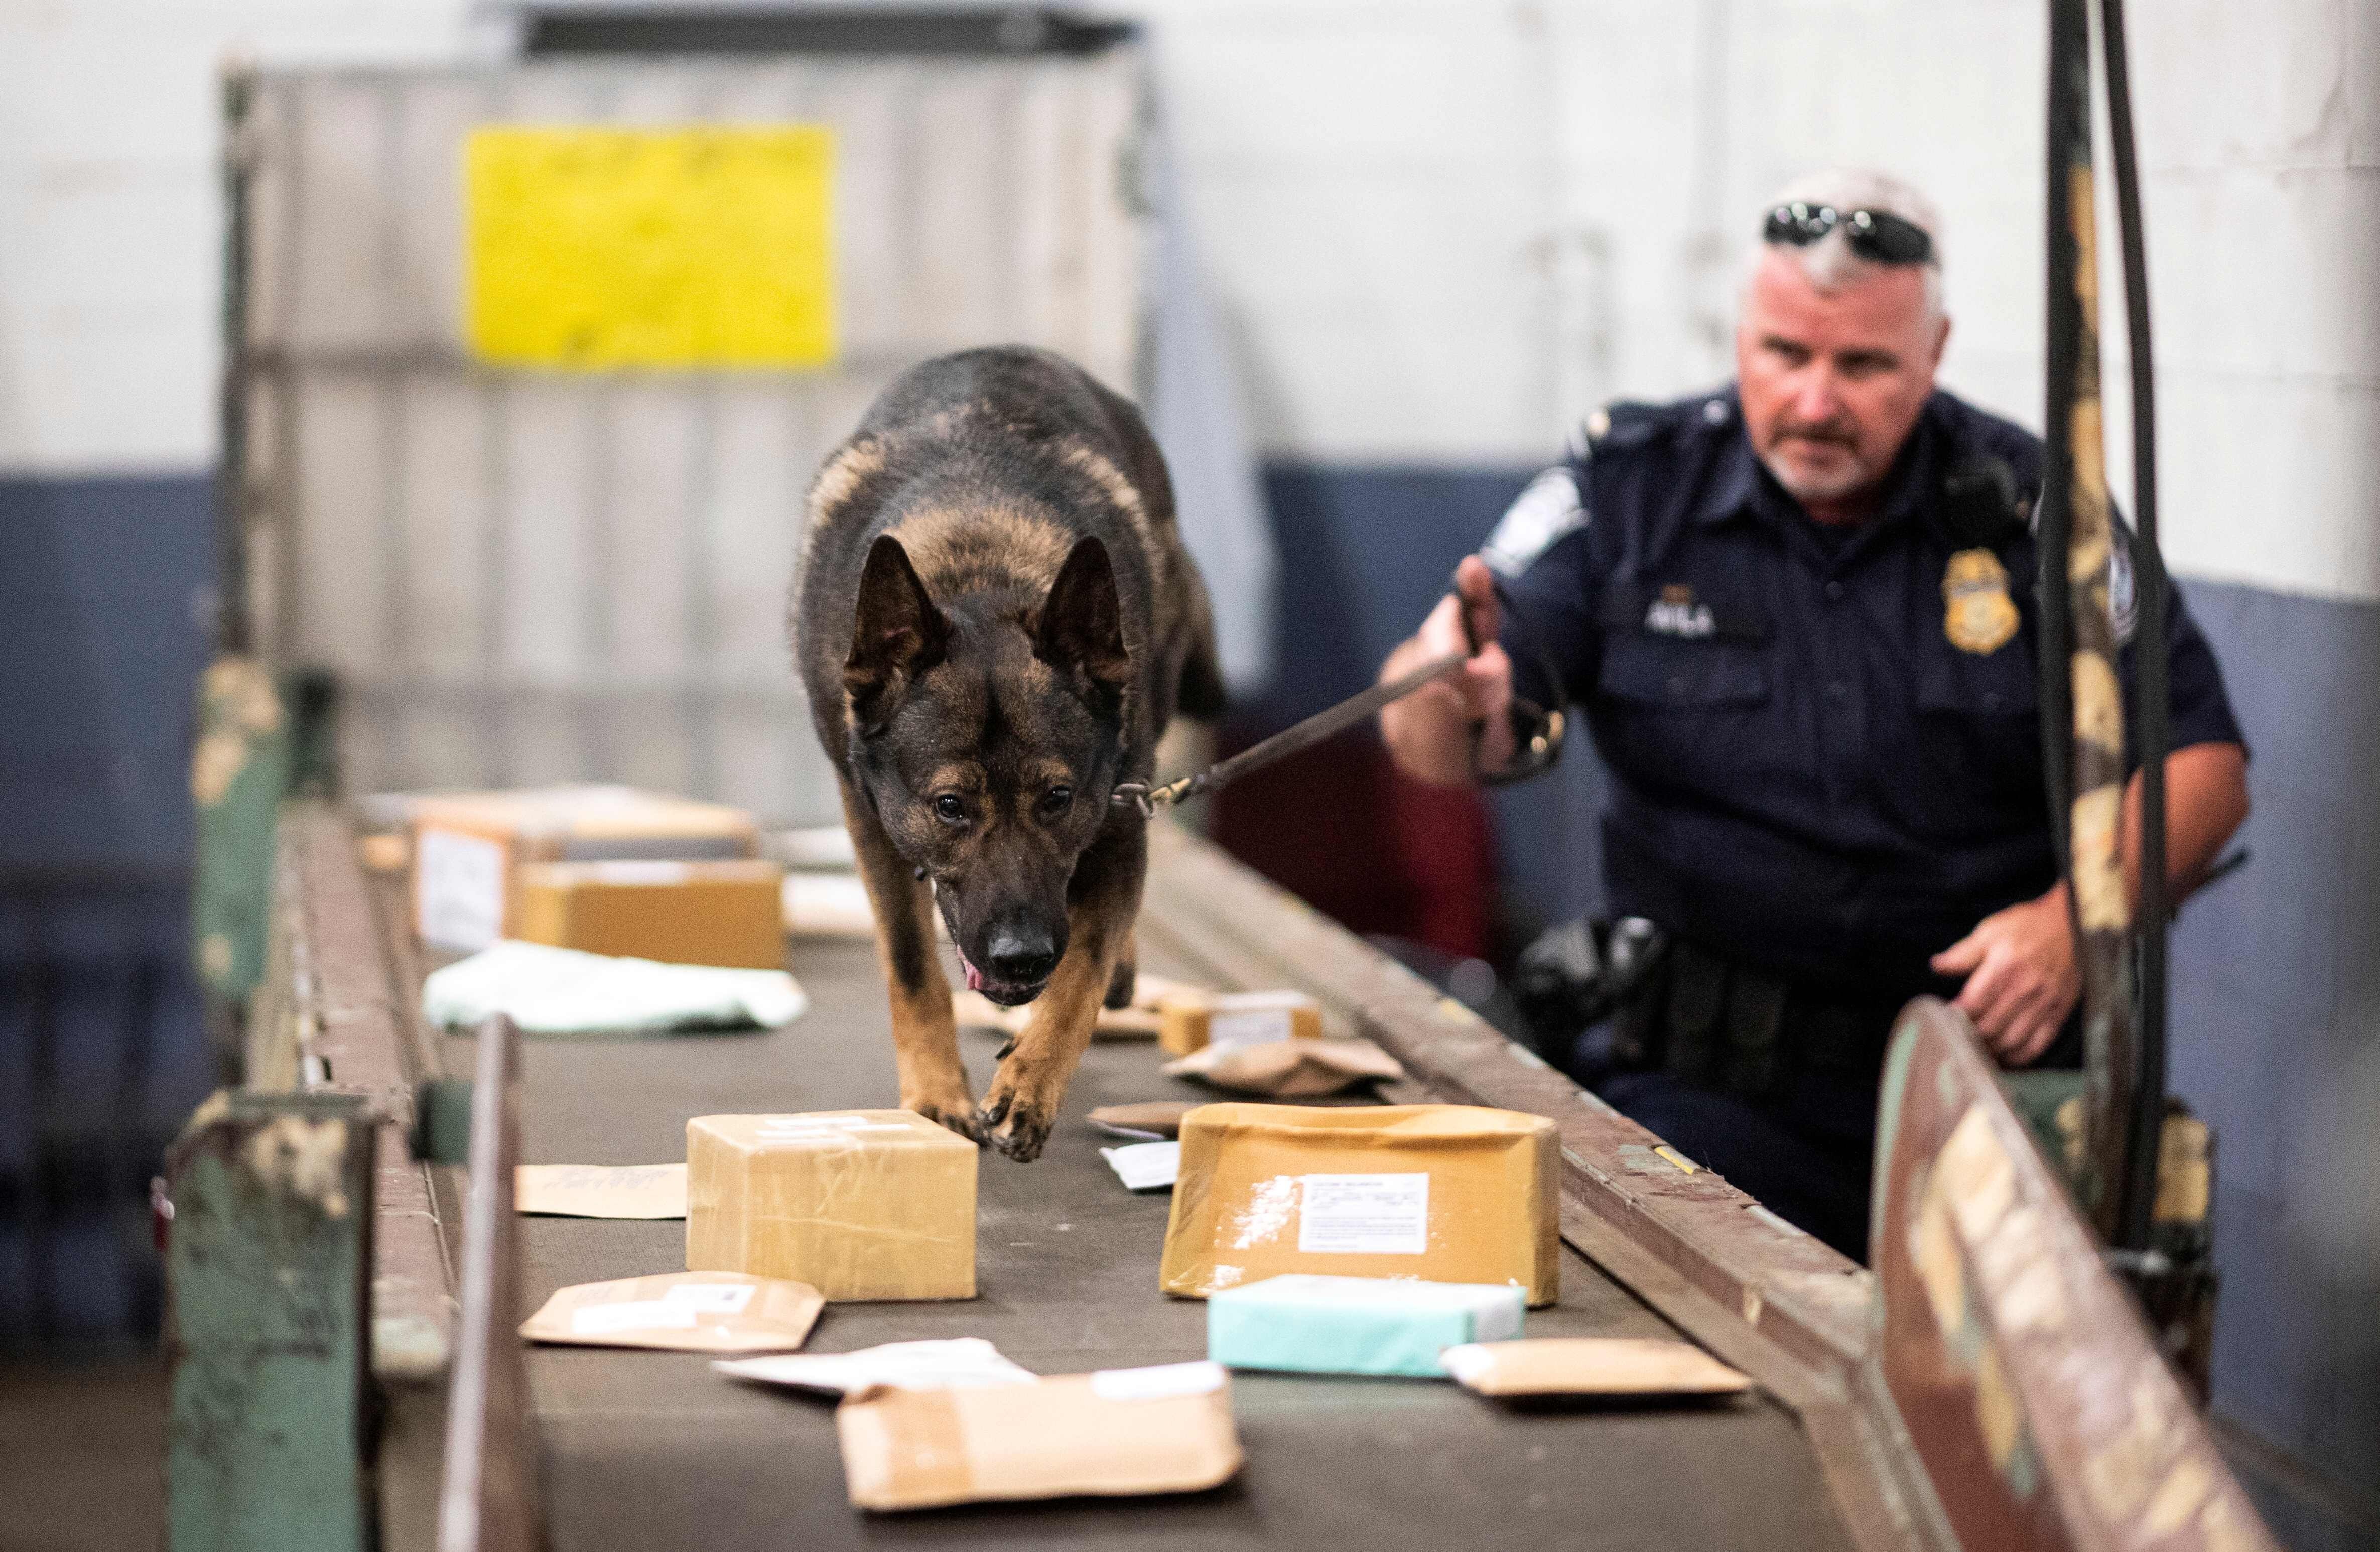 An officer from Customs and Border Protection working with a dog to check parcels for fentanyl at John F Kennedy Airport in New York in 2019. Photo: AFP